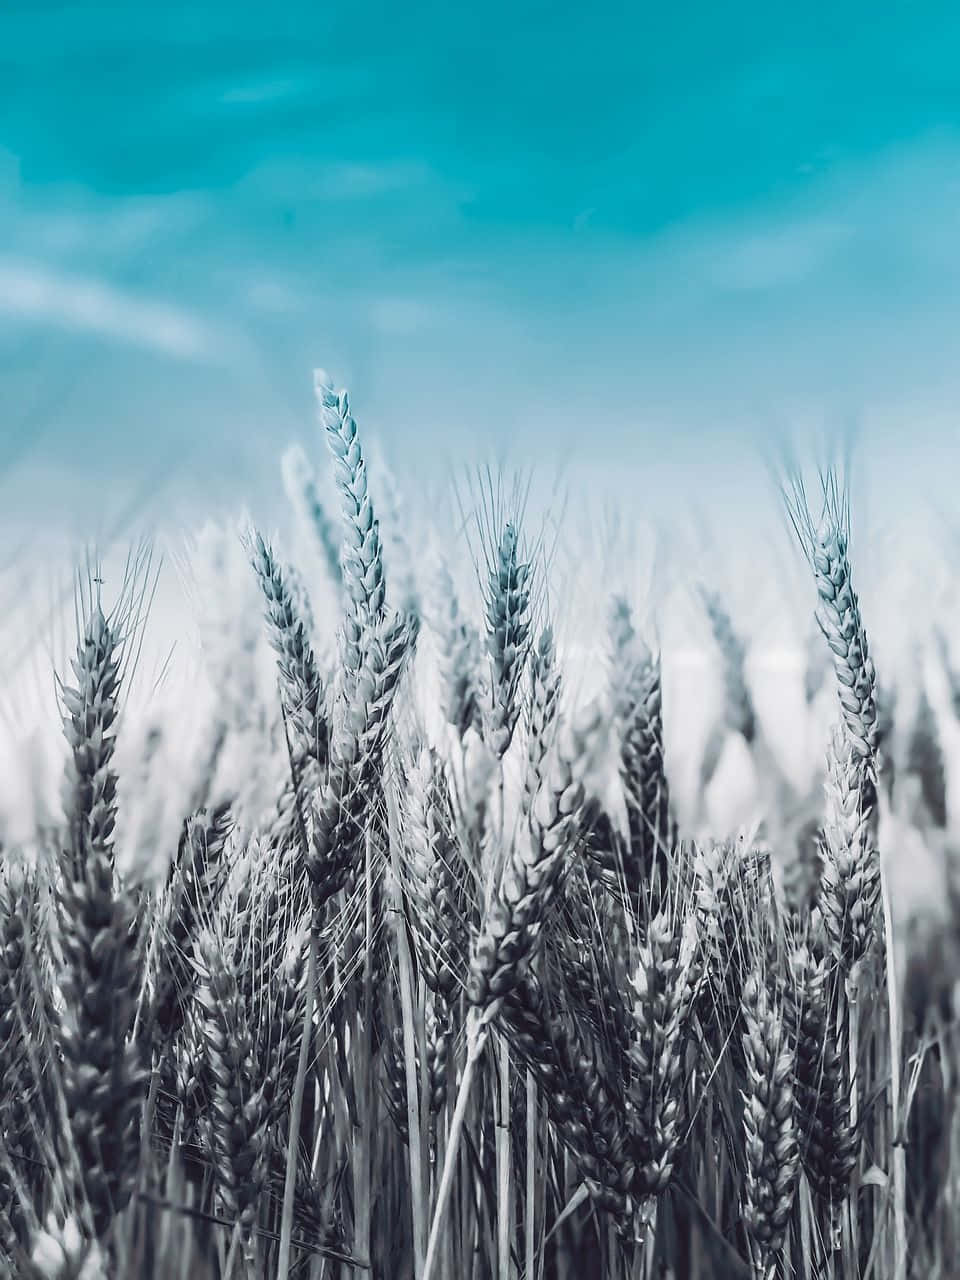 A Field Of Wheat With Blue Sky And Clouds